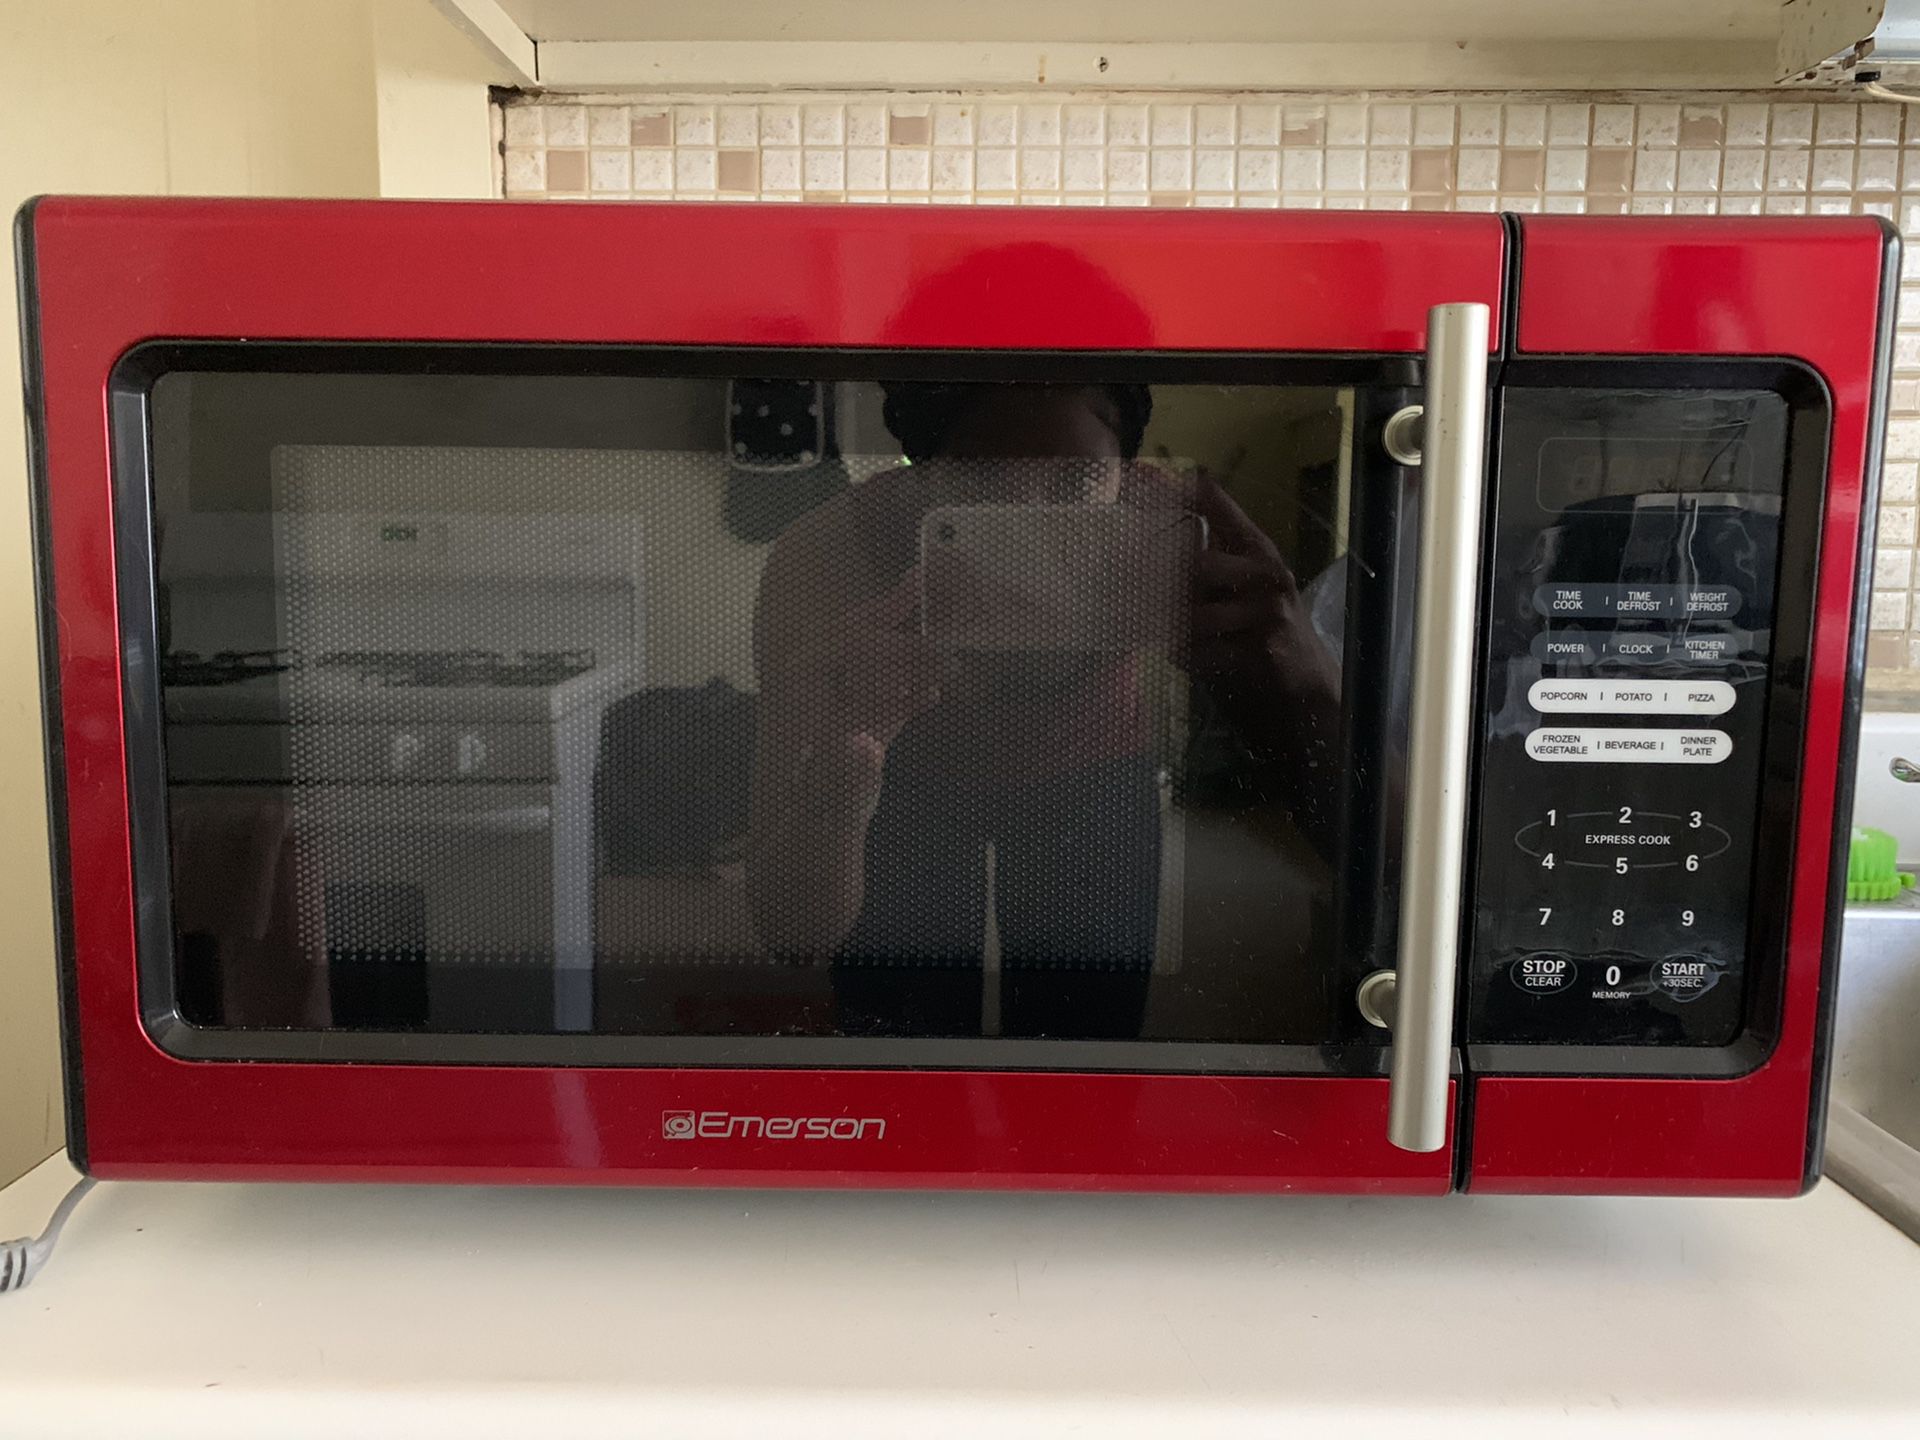 Emerson Microwave - Red